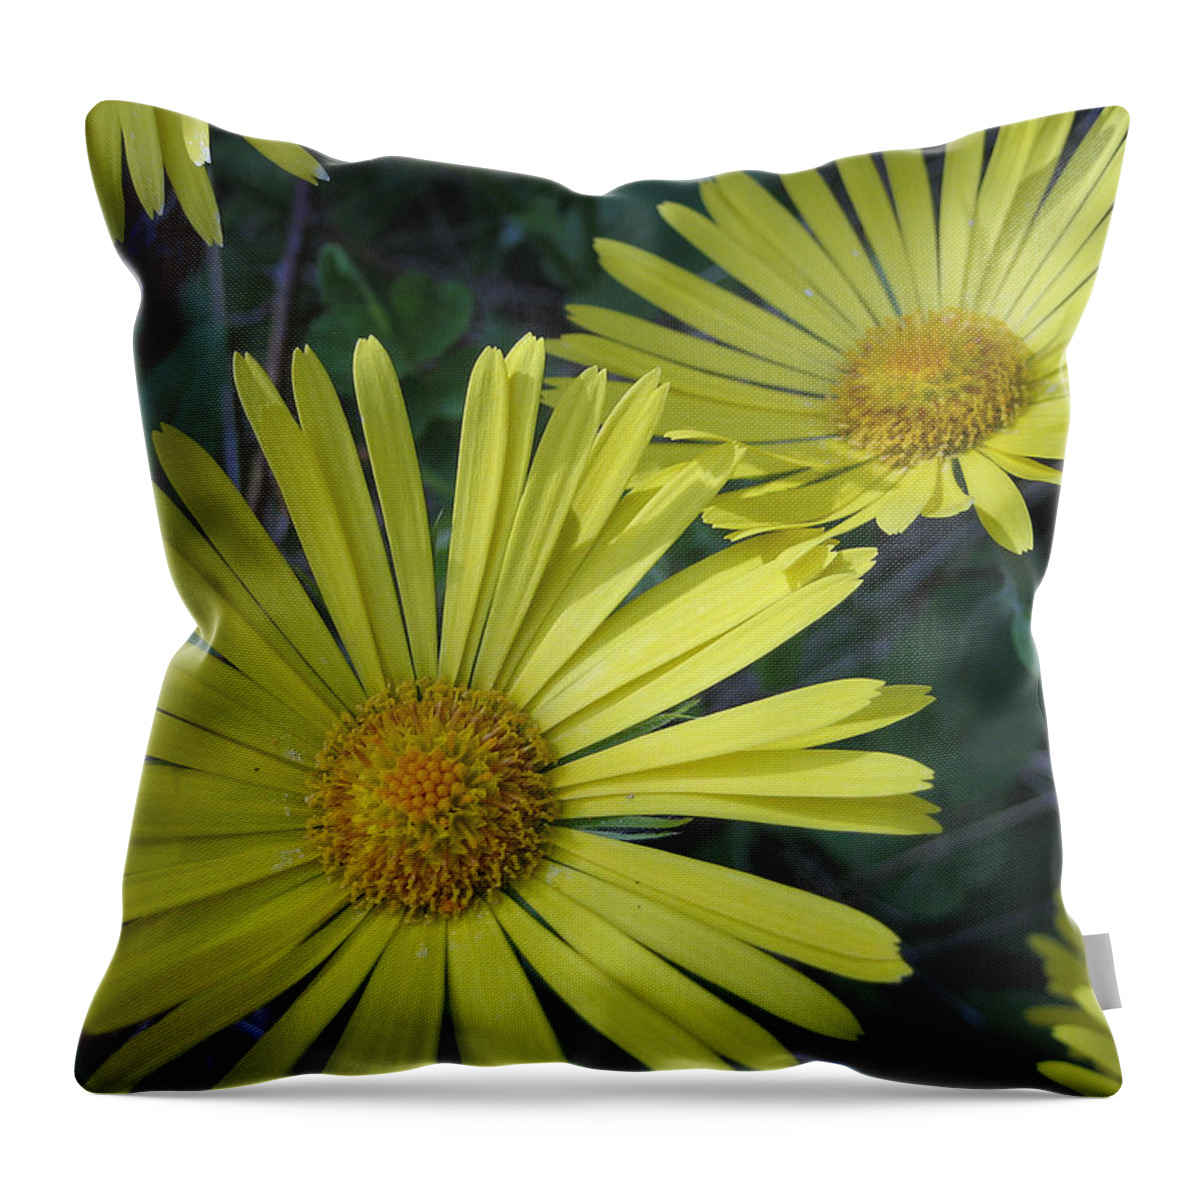 Daisies Throw Pillow featuring the photograph Spring Yellow by Cheryl Hoyle